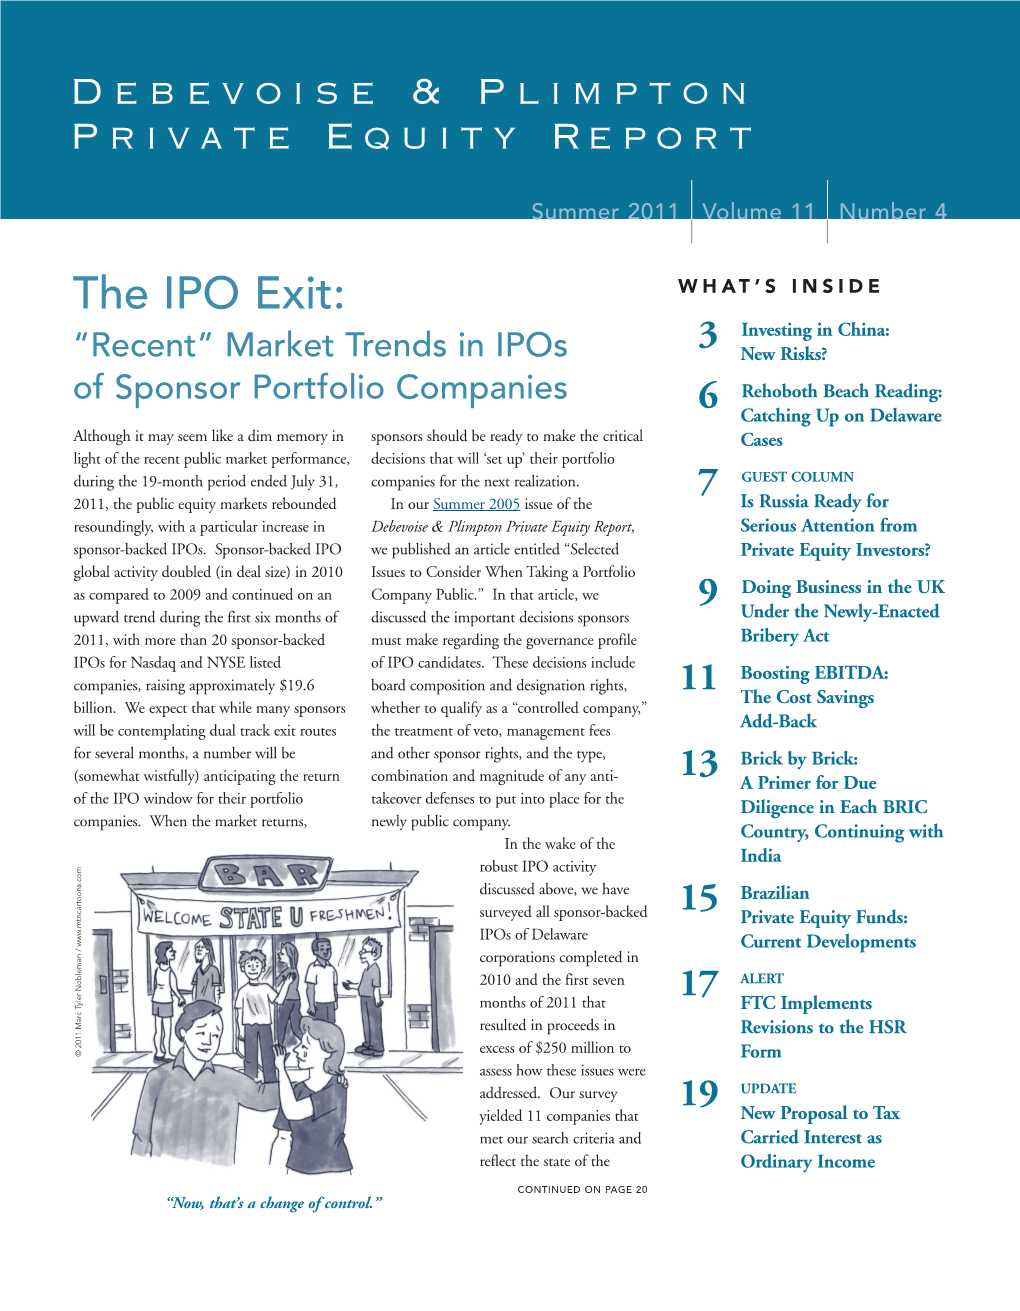 The IPO Exit